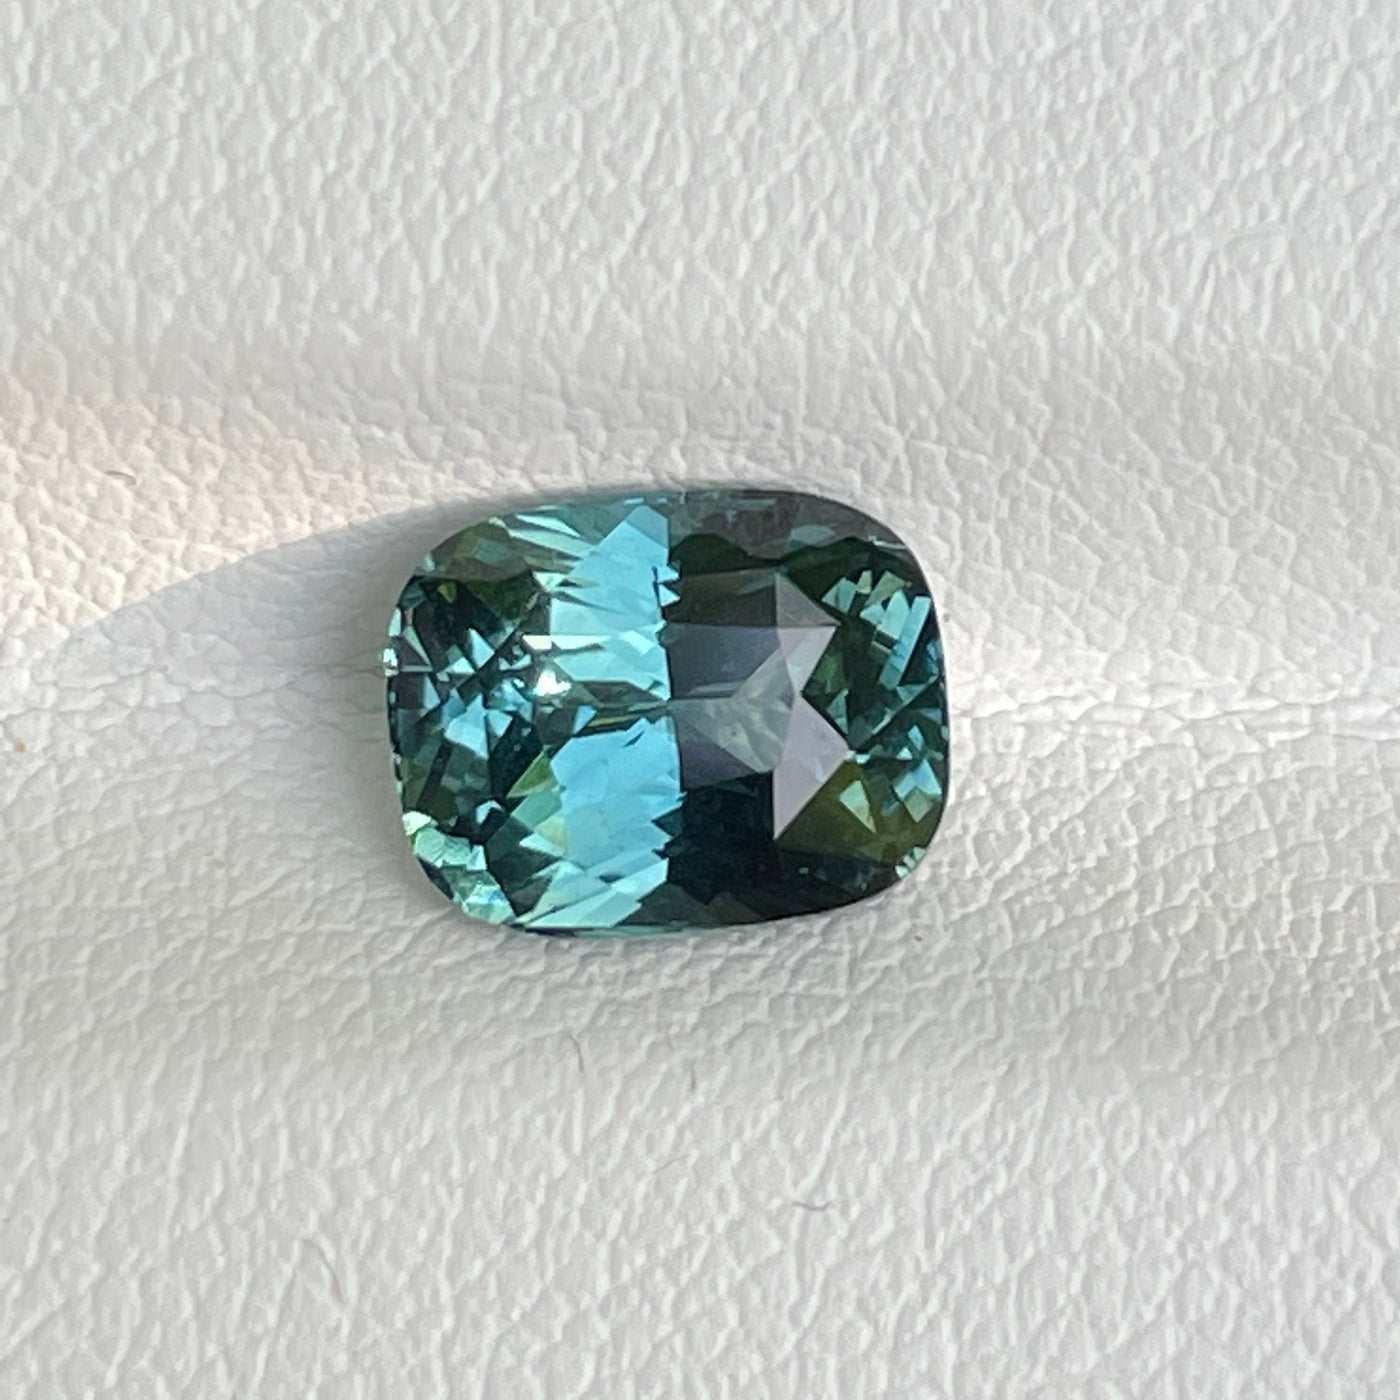 Teal Sapphire   2.05 Ct